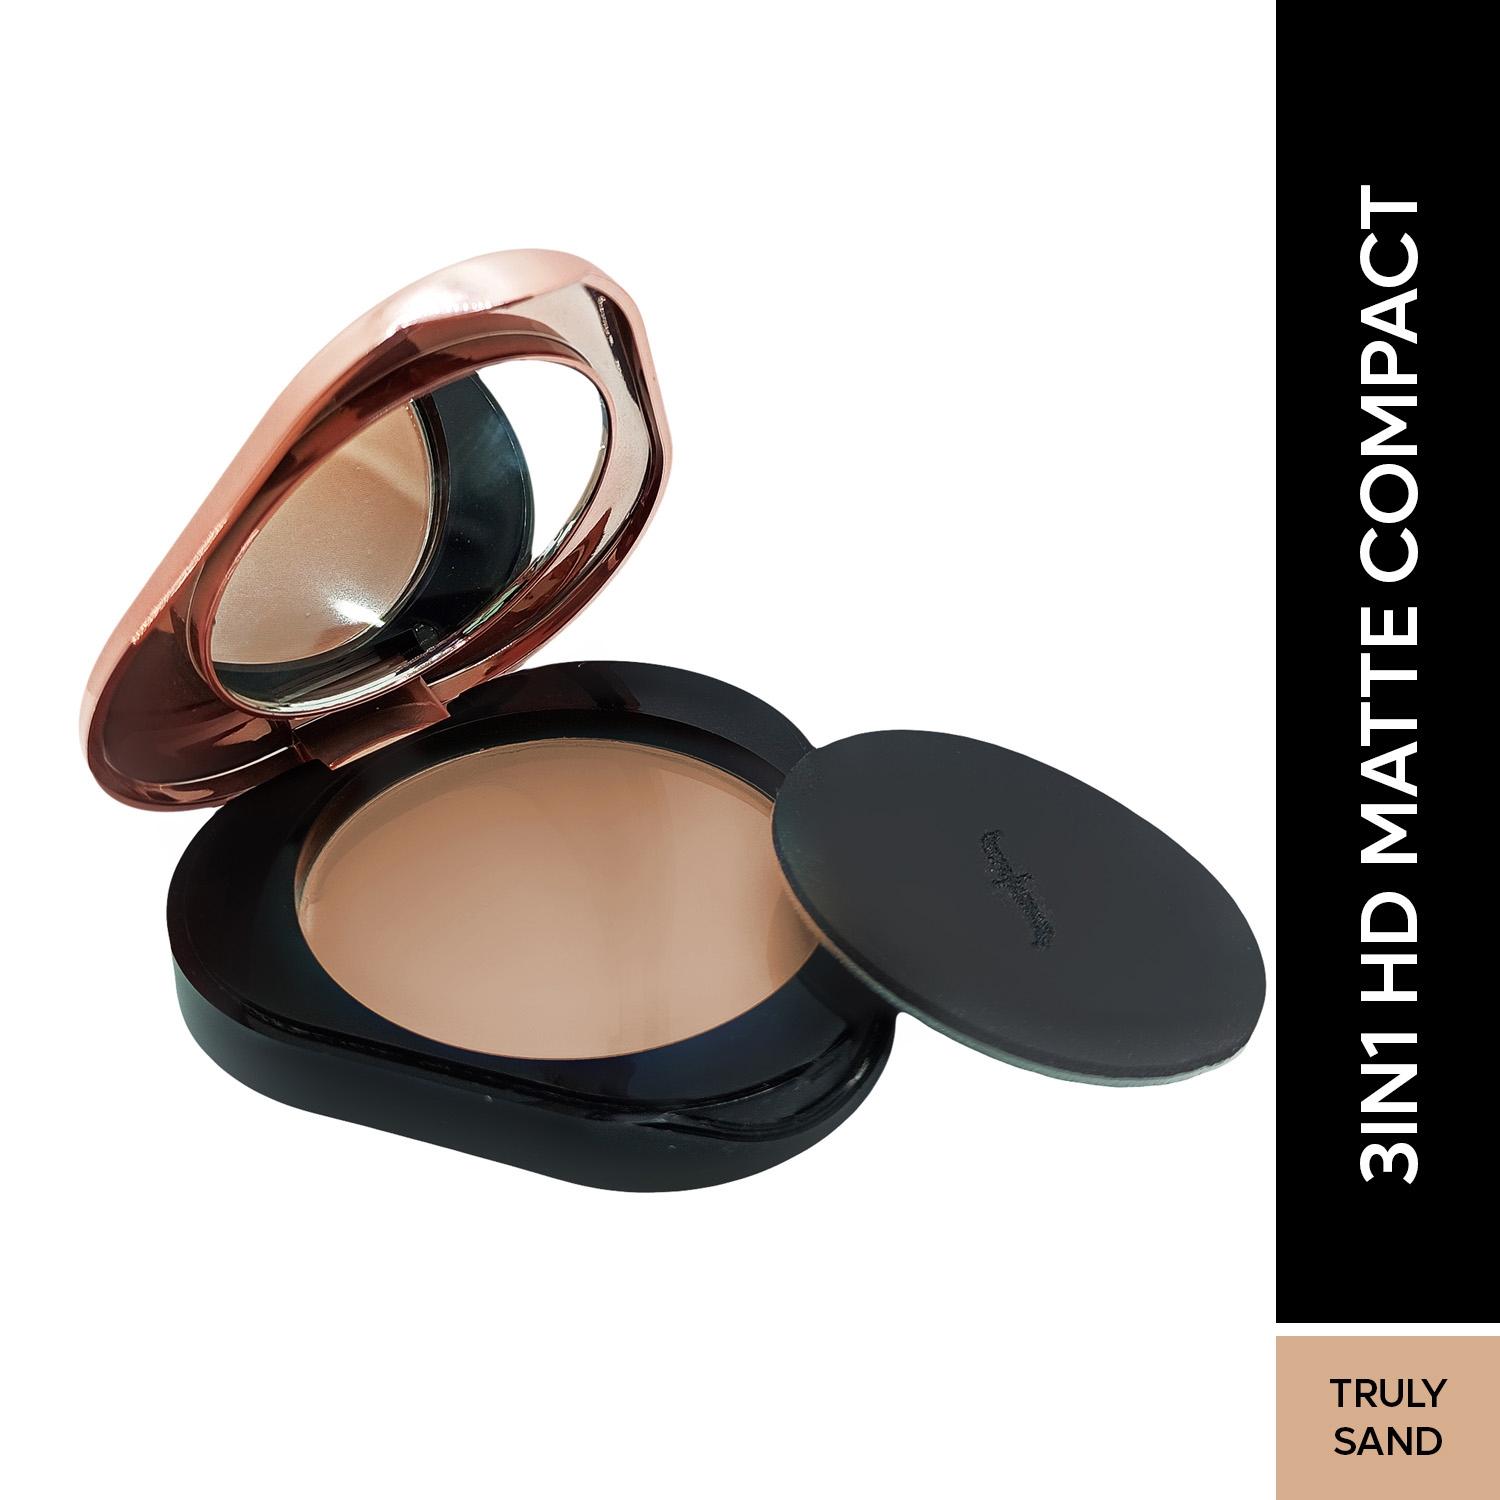 faces canada 3 in 1 hd matte compact + foundation + hydration - truly sand 04 (8g)